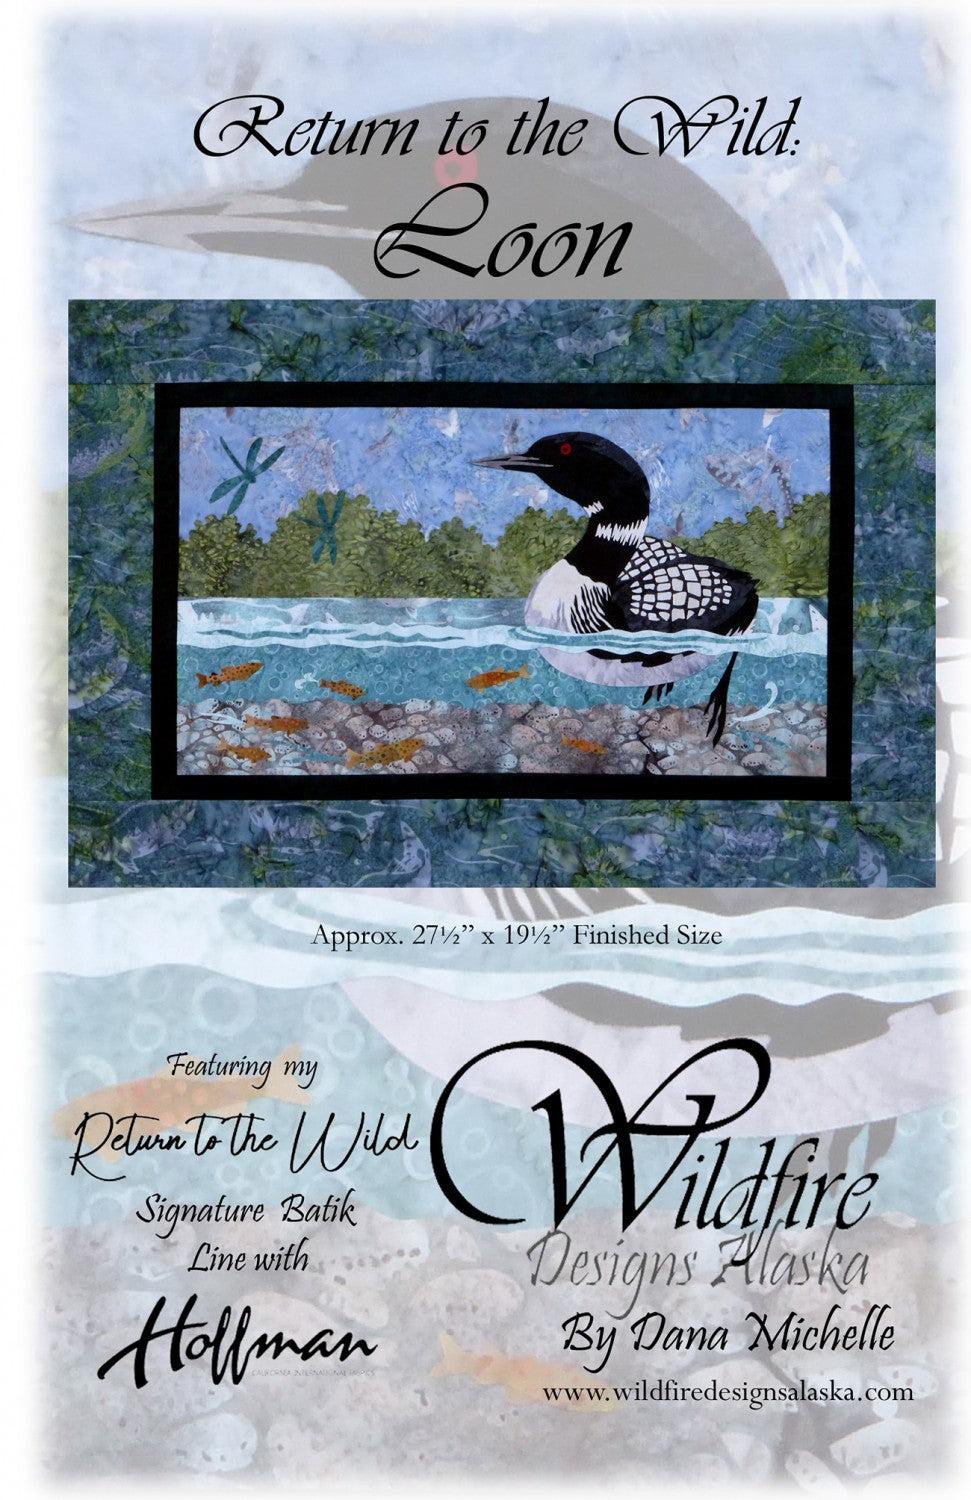 Wildfire Designs Alaska Return to the Wild Loon Laser Cut Applique Kit Front Cover